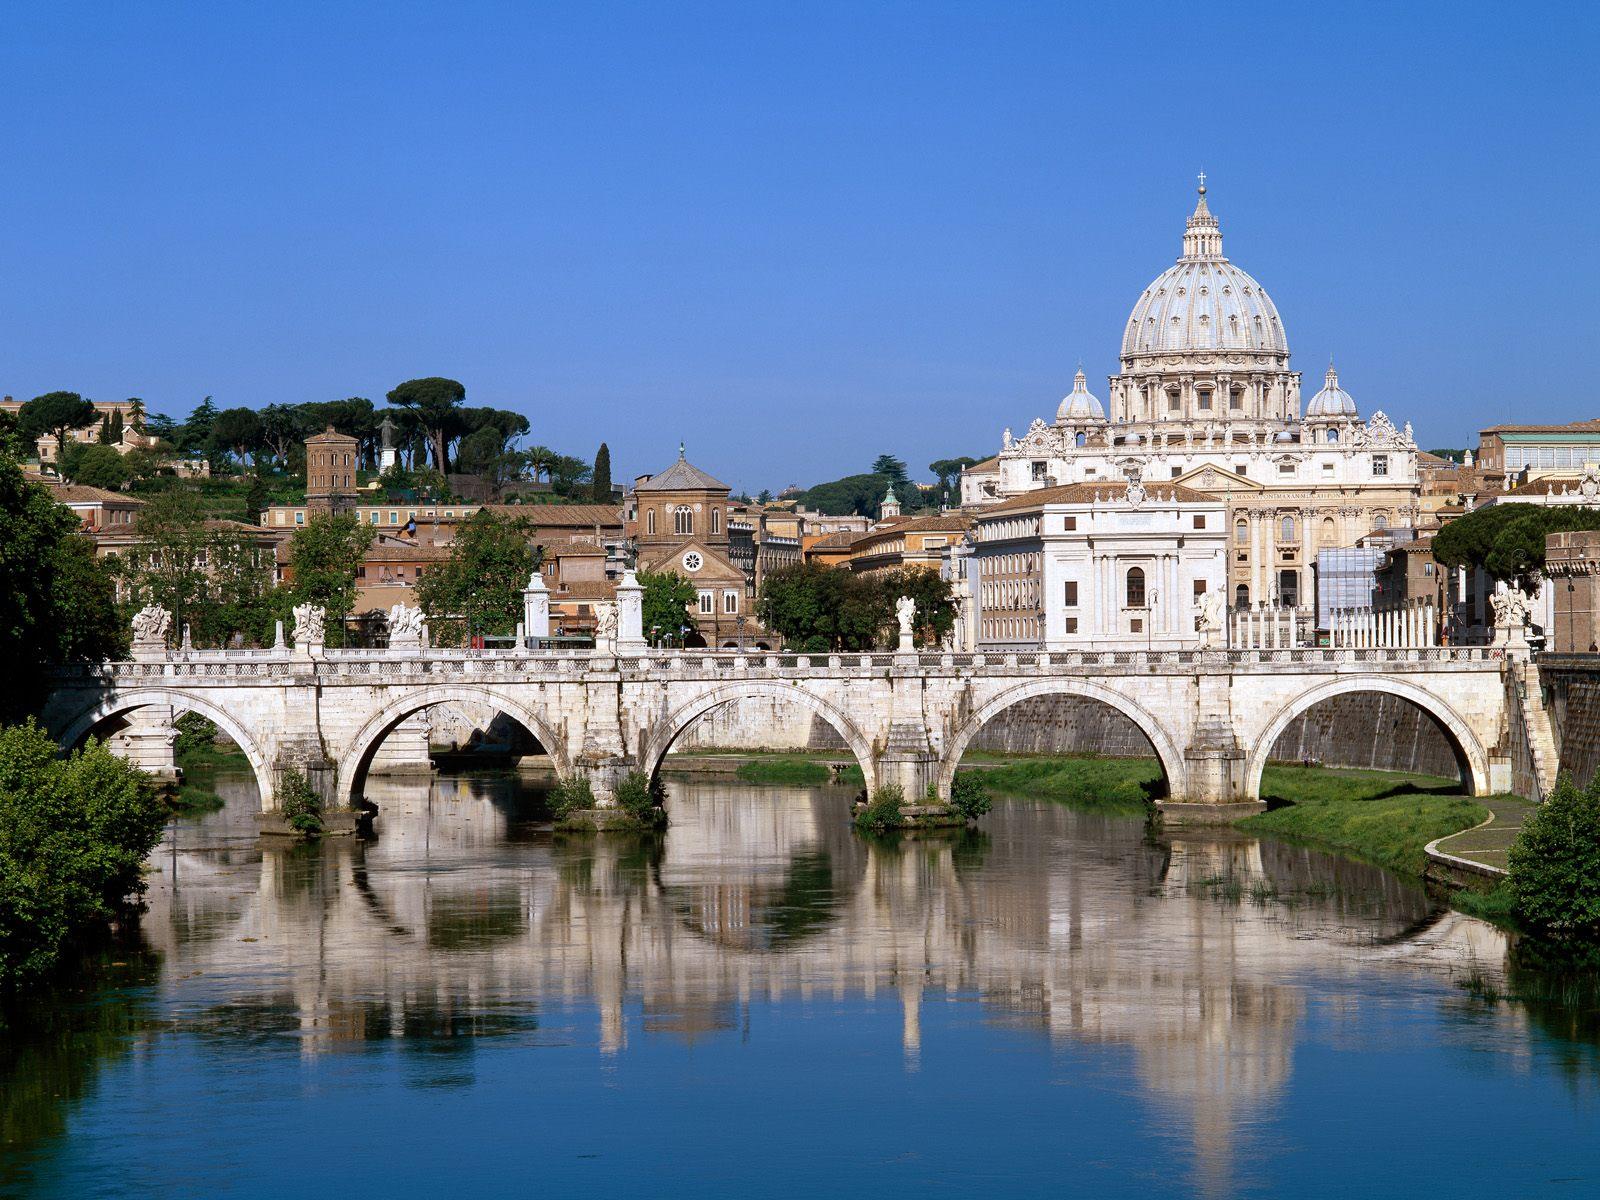 The guide to the Vatican City